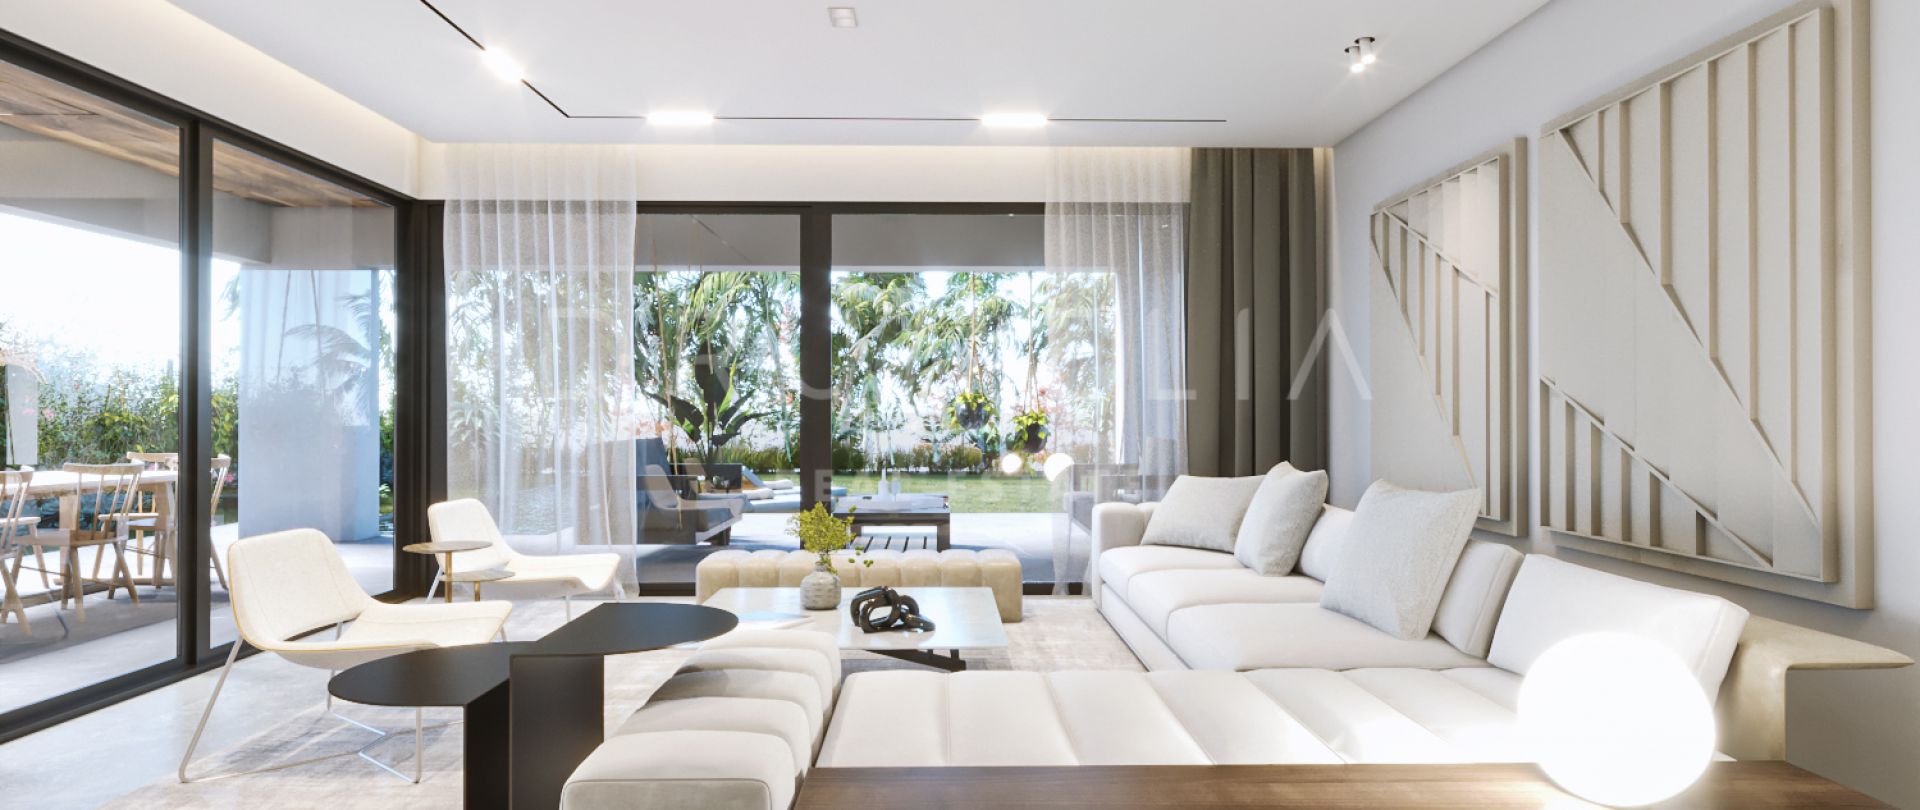 Brand-new stunning contemporary style luxury villa for sale on New Golden Mile of Estepona